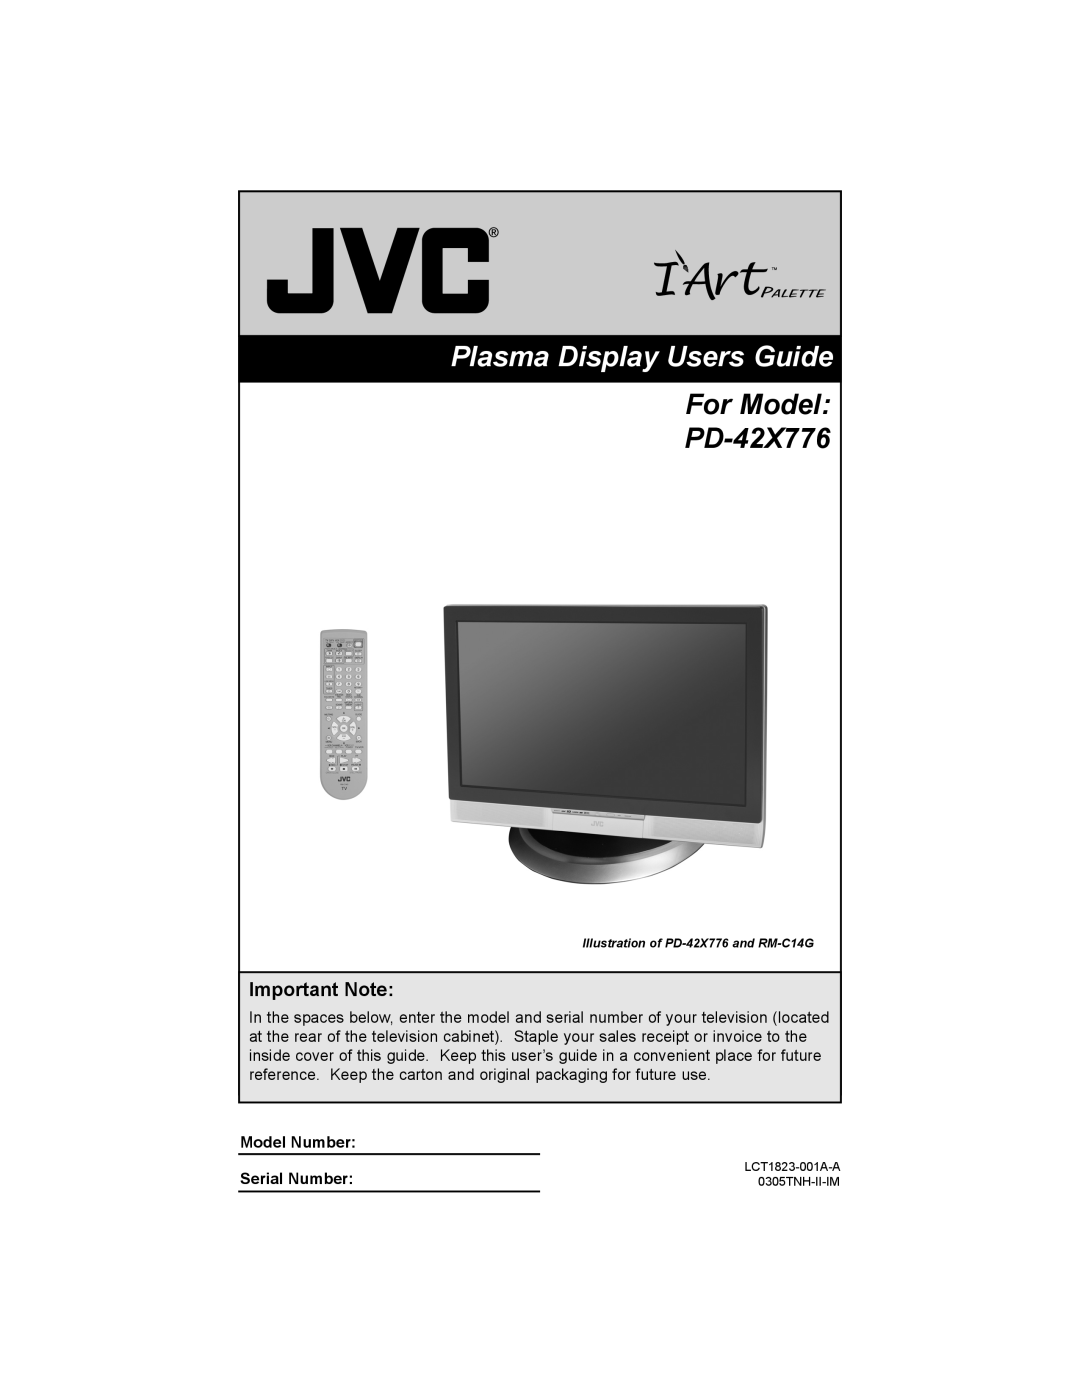 JVC manual Important Note, Model Number Serial Number, Plasma Display Users Guide, For Model PD-42X776 